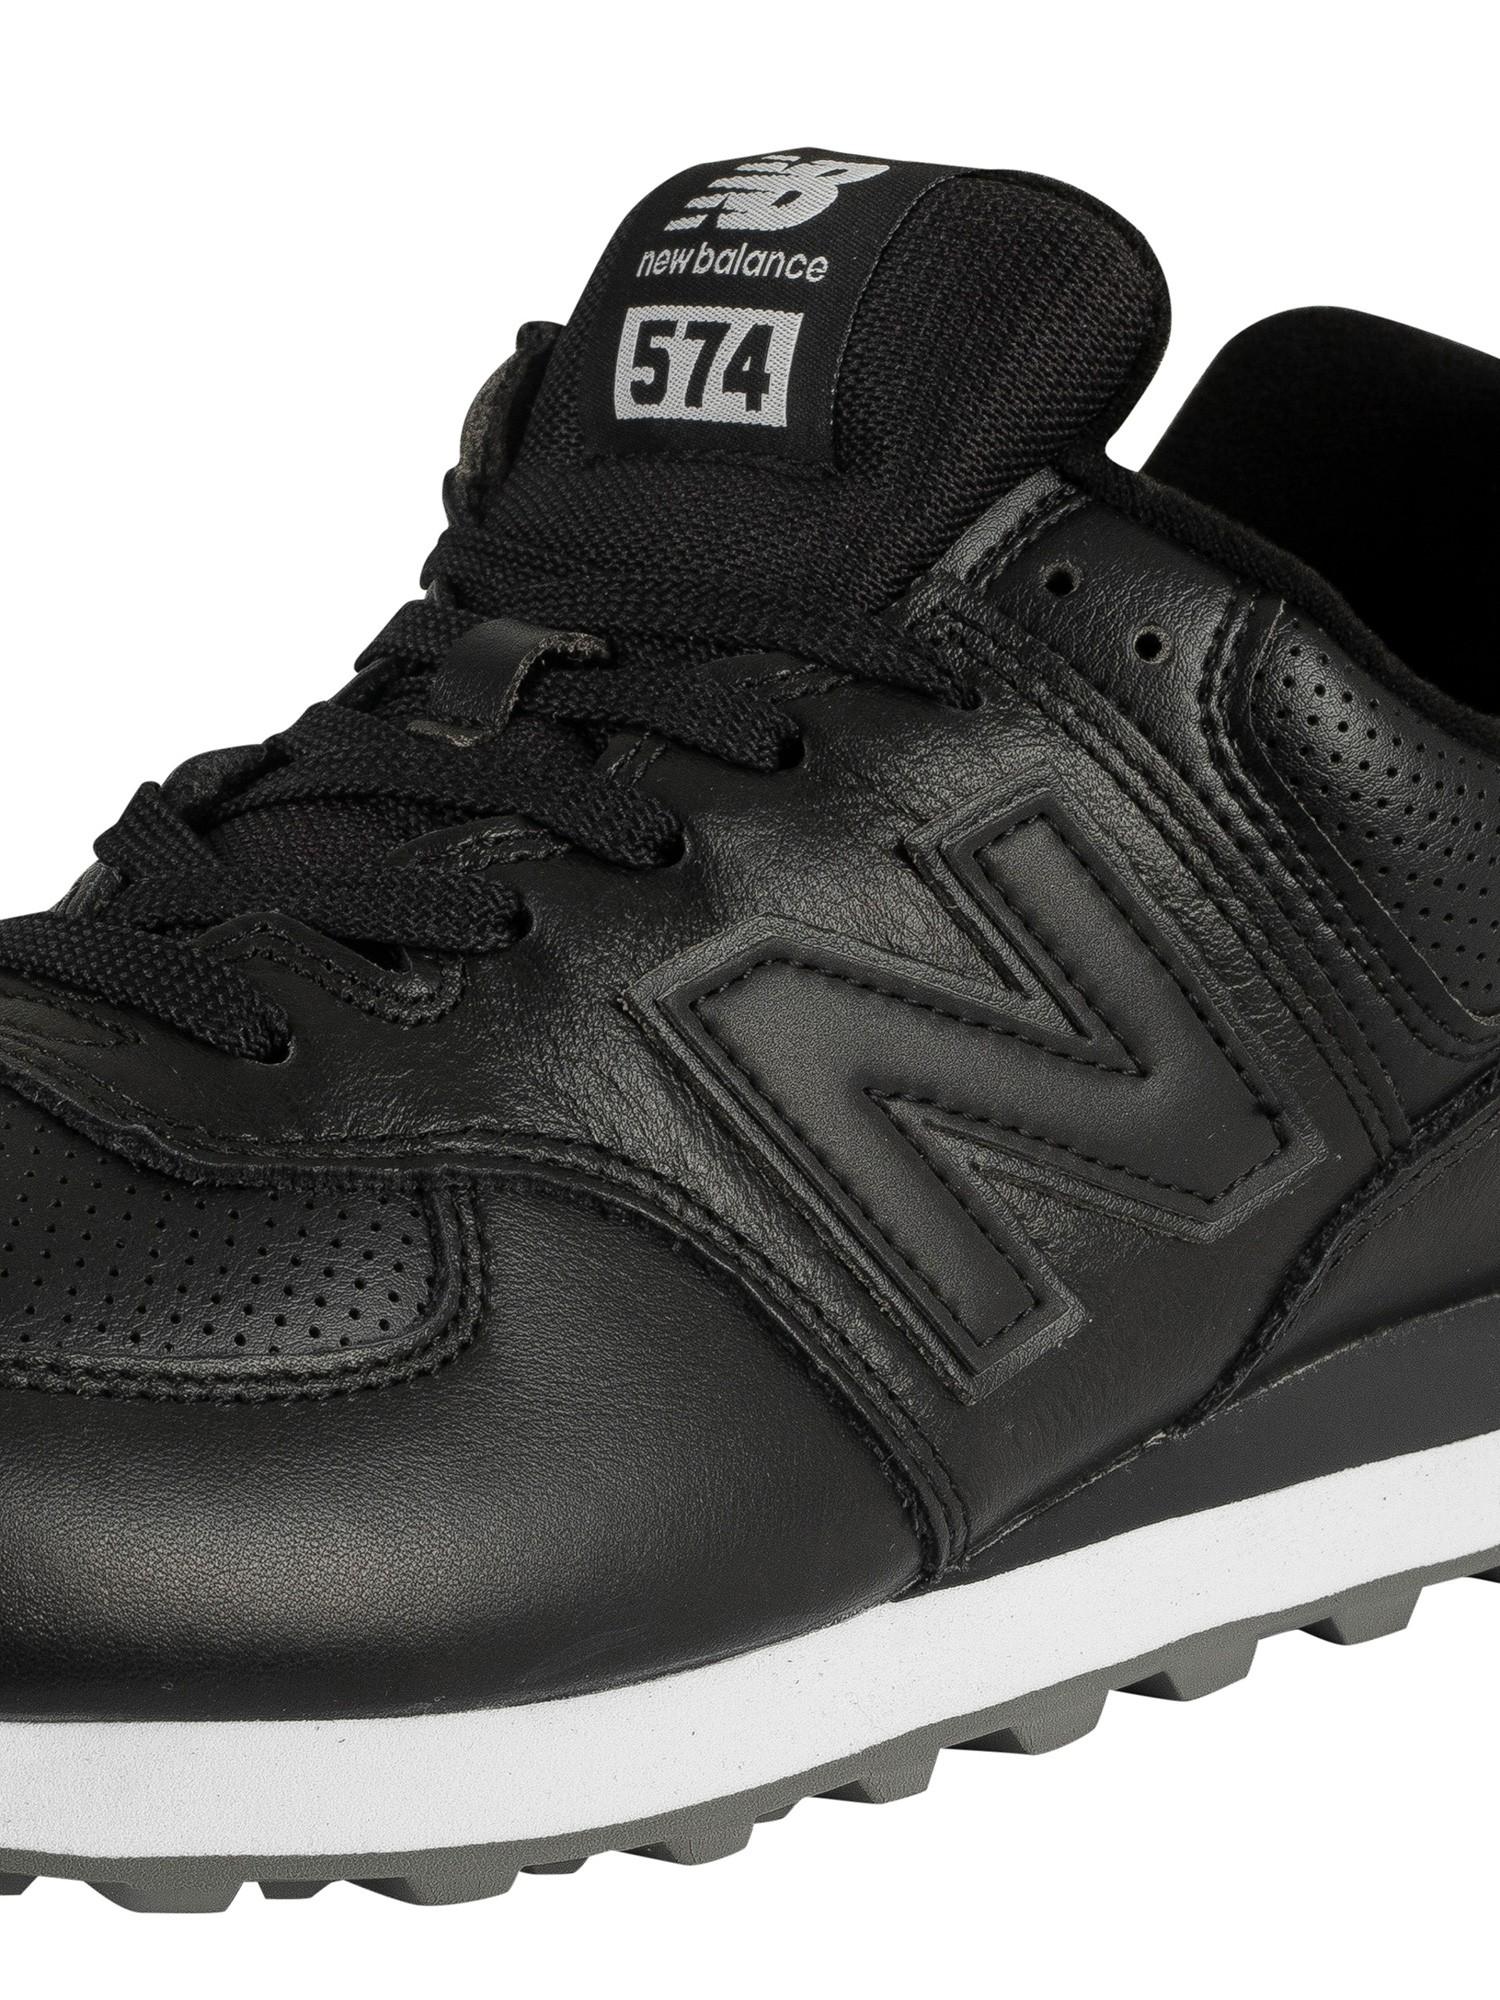 black leather new balance trainers